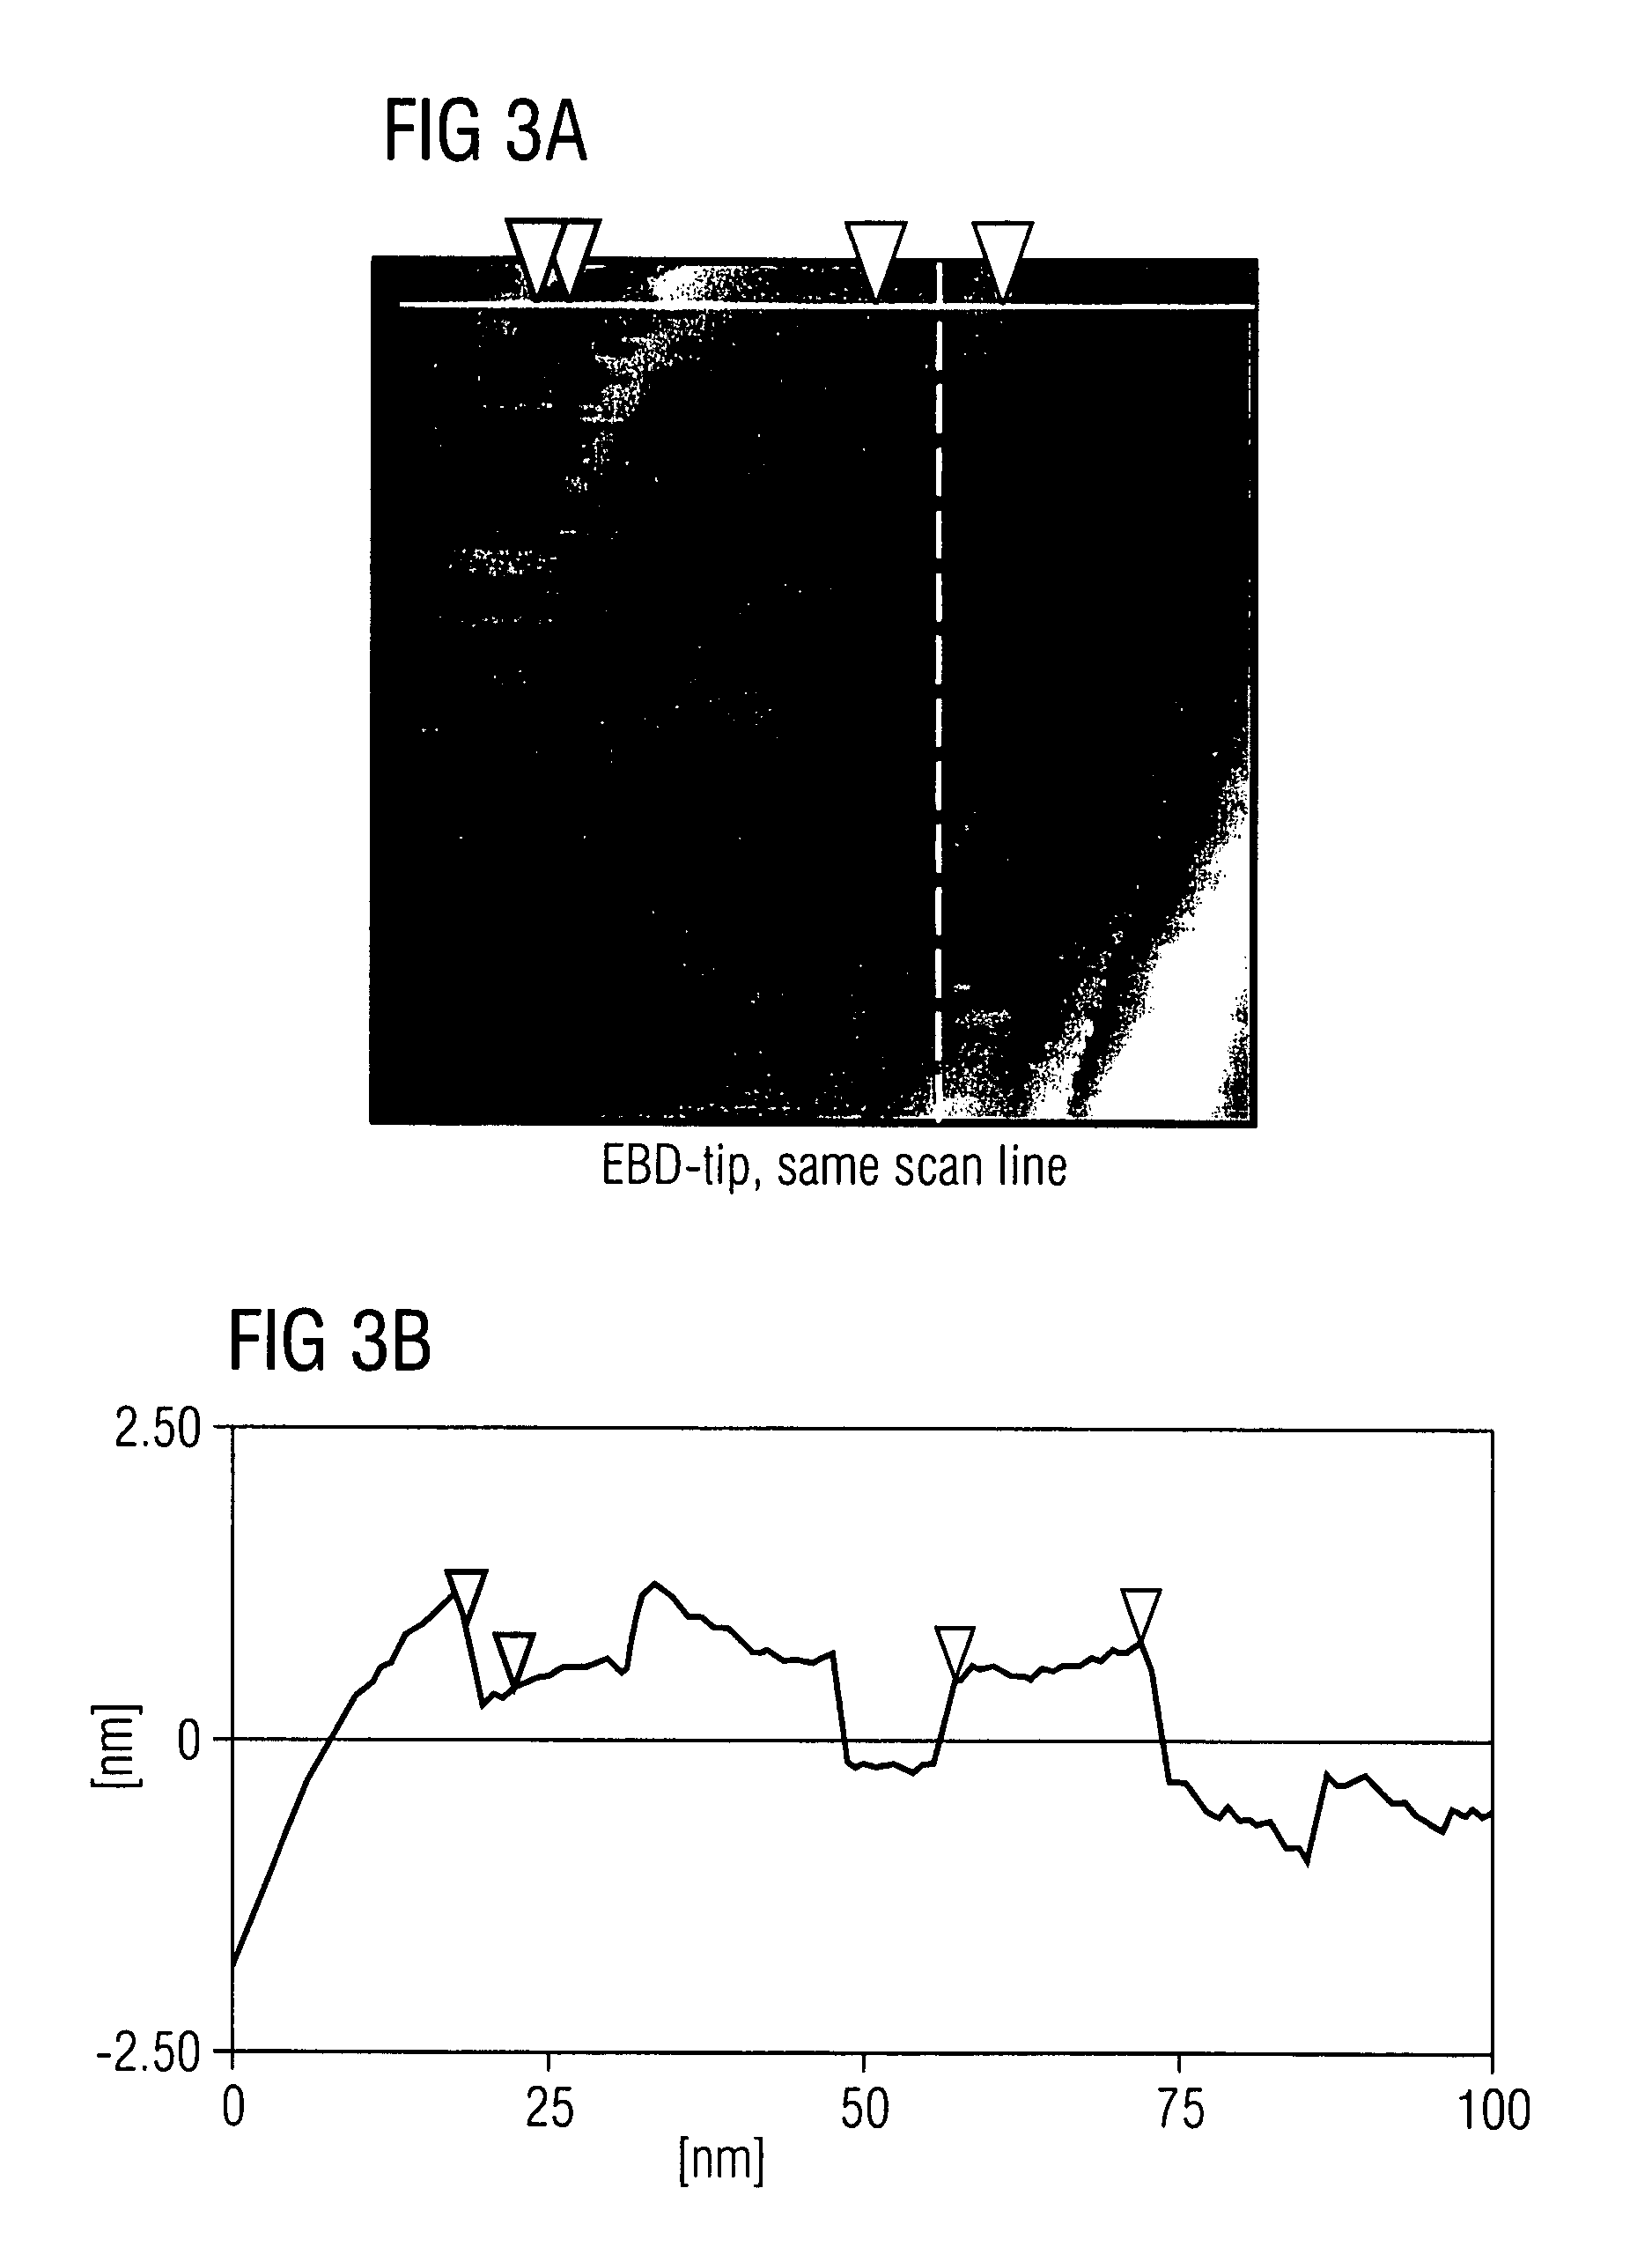 Method and apparatus for storing and reading information in a ferroelectric material